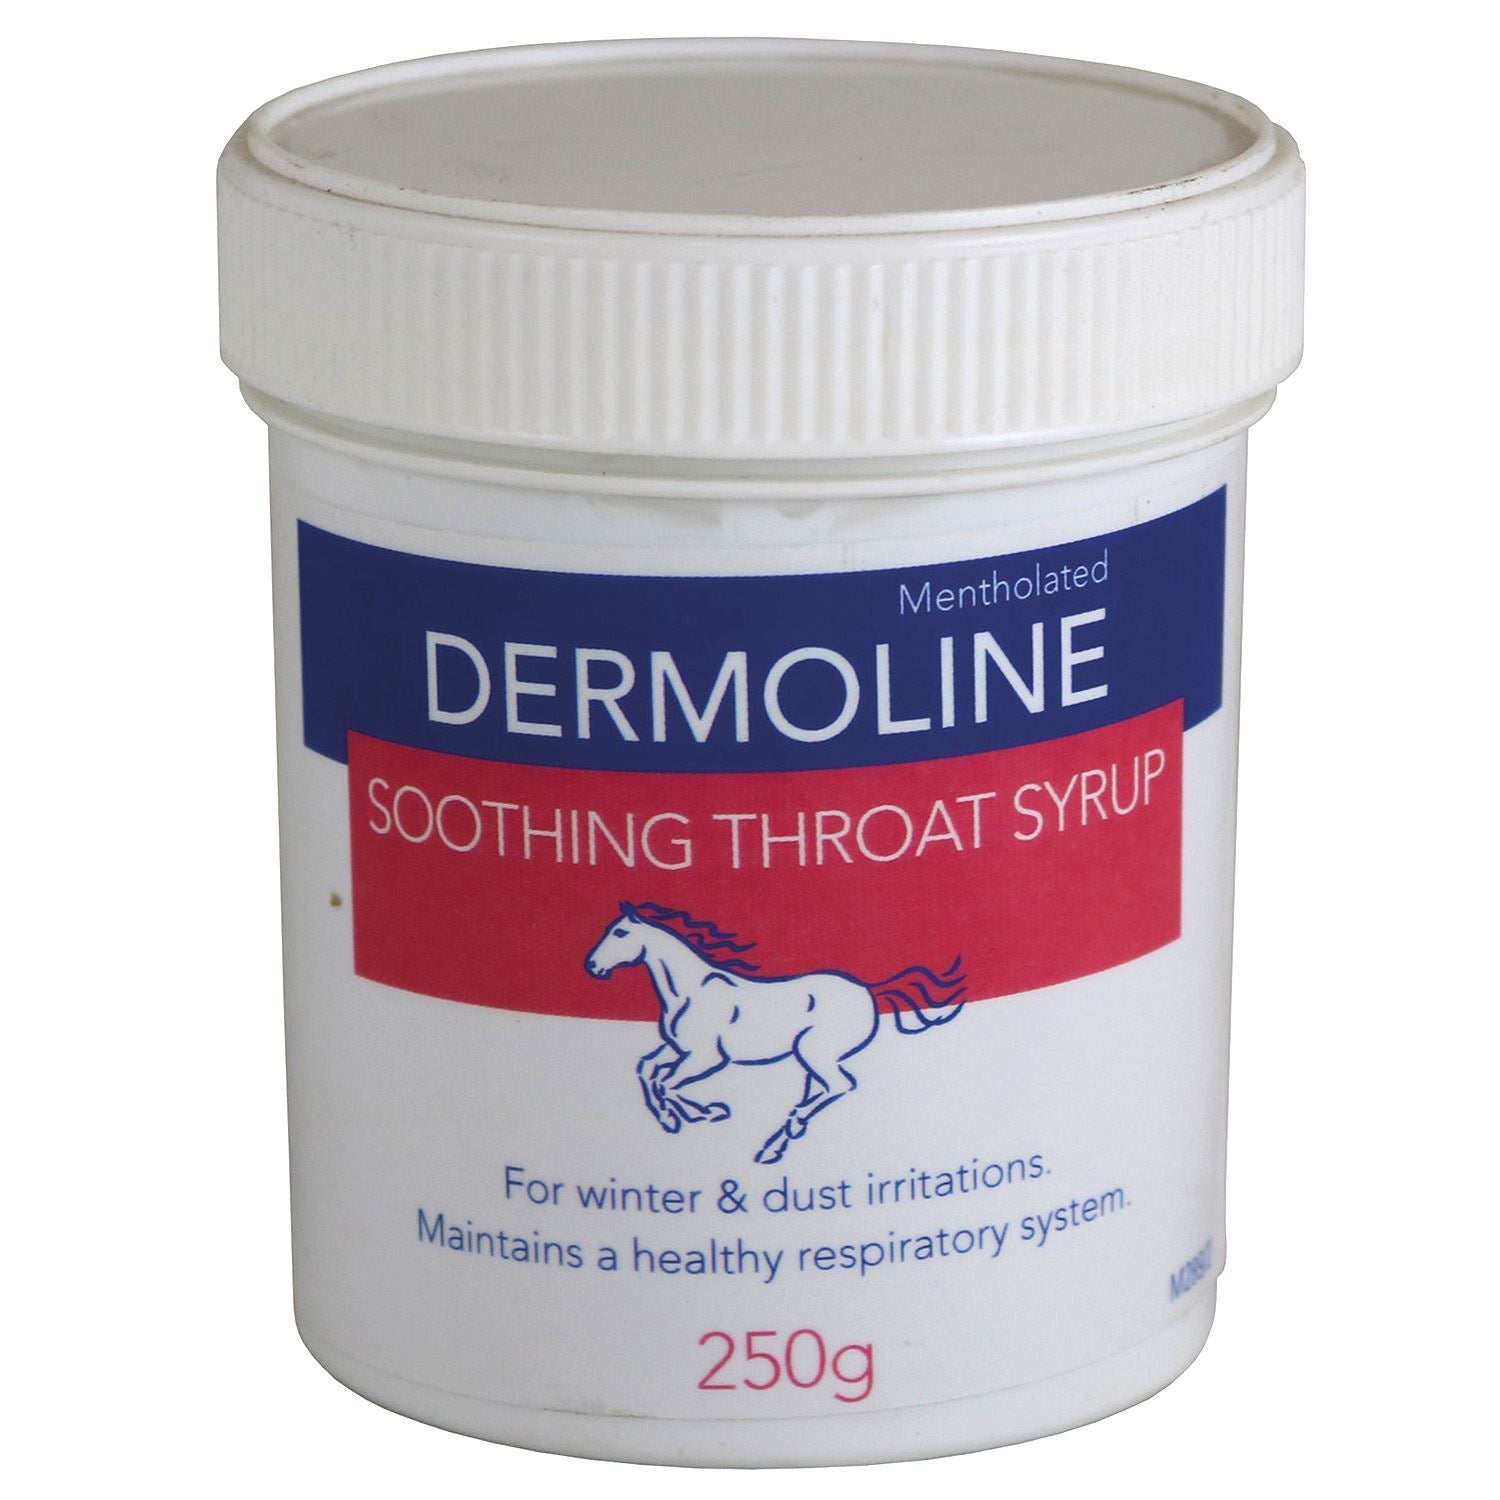 Dermoline Soothing Throat Syrup - Just Horse Riders